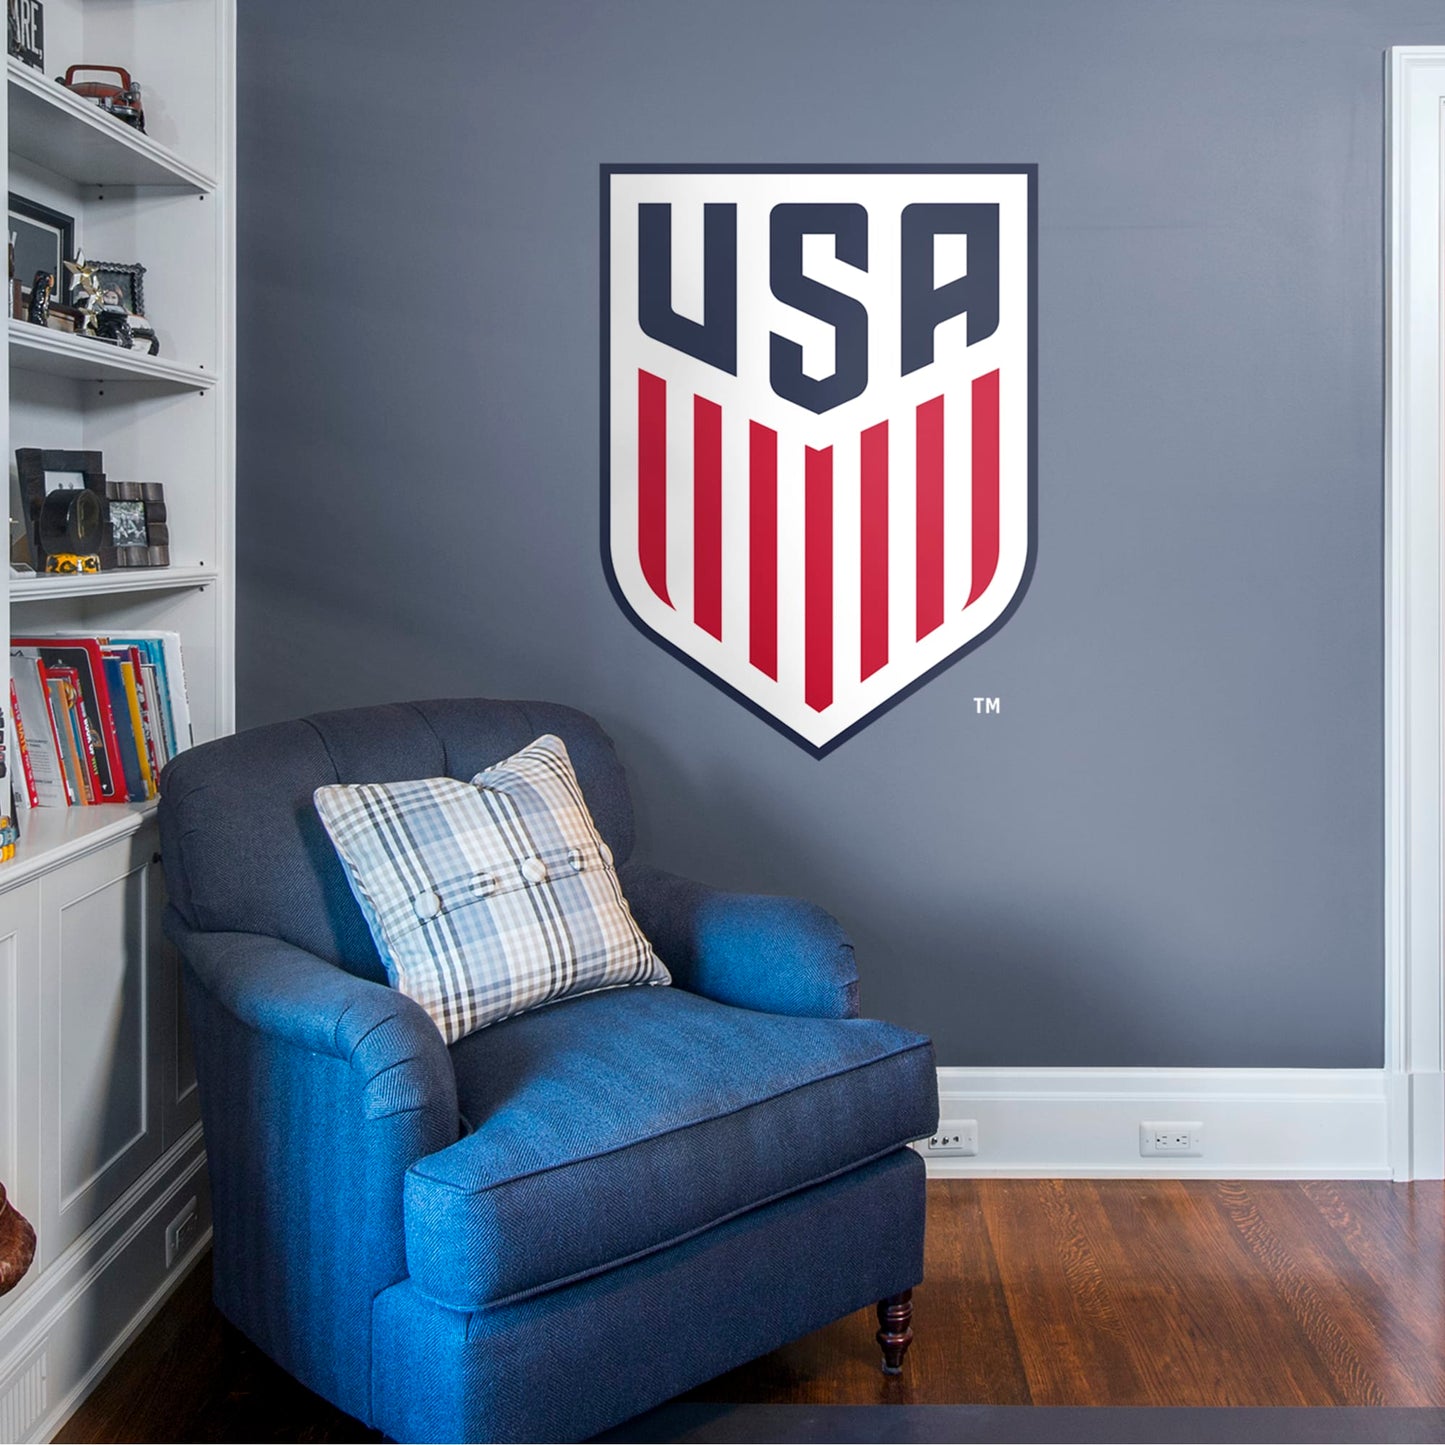 US Soccer: Men's National Team Crest - Officially Licensed Removable Wall Decal